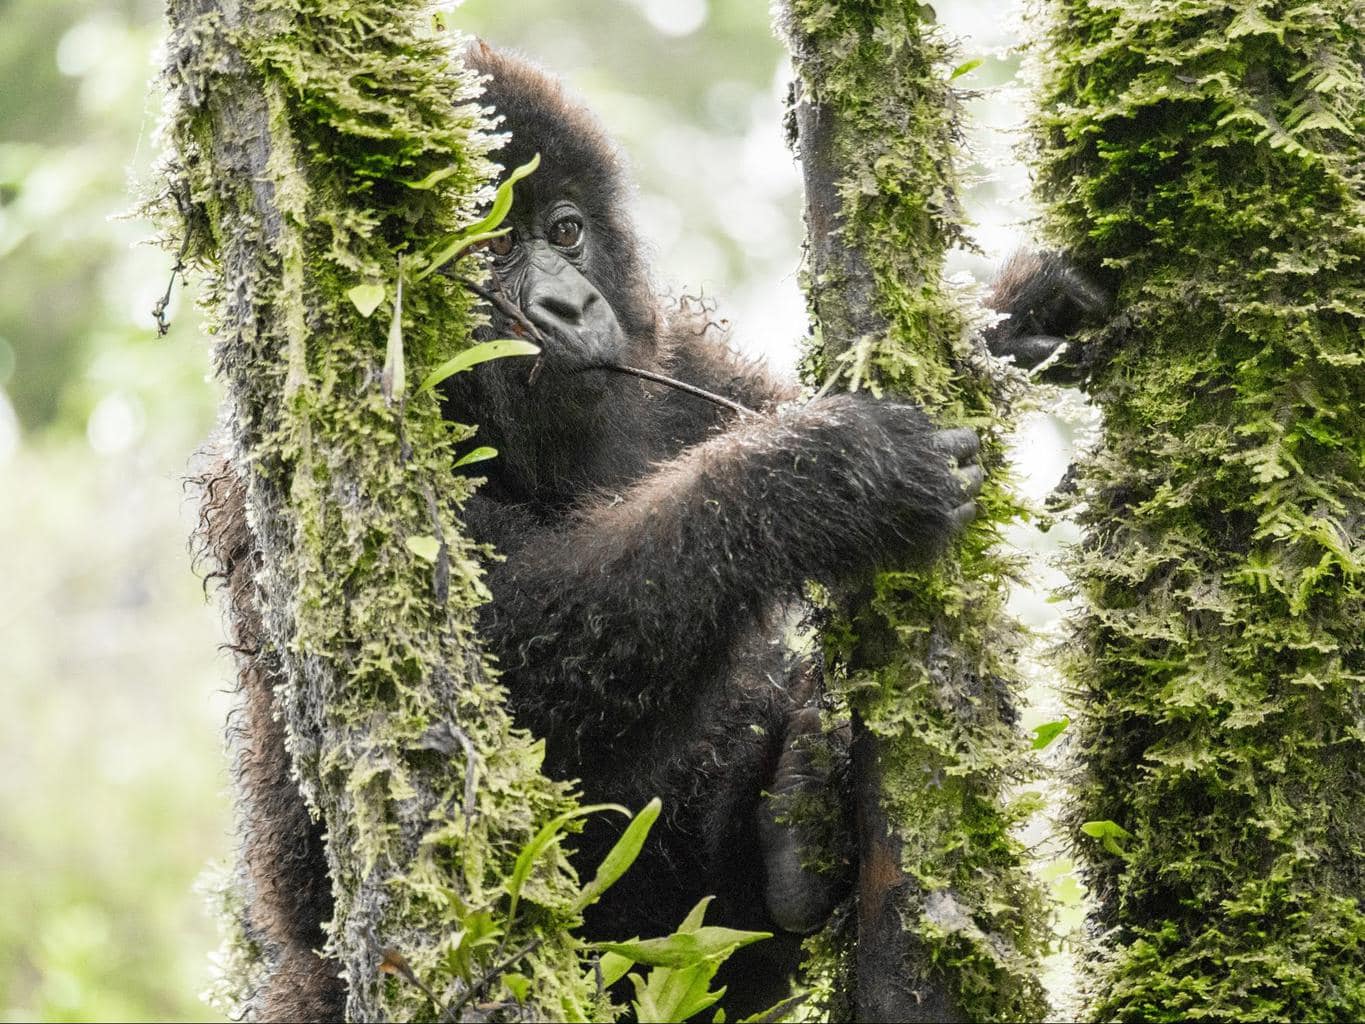 A young gorilla trying to climb the tree